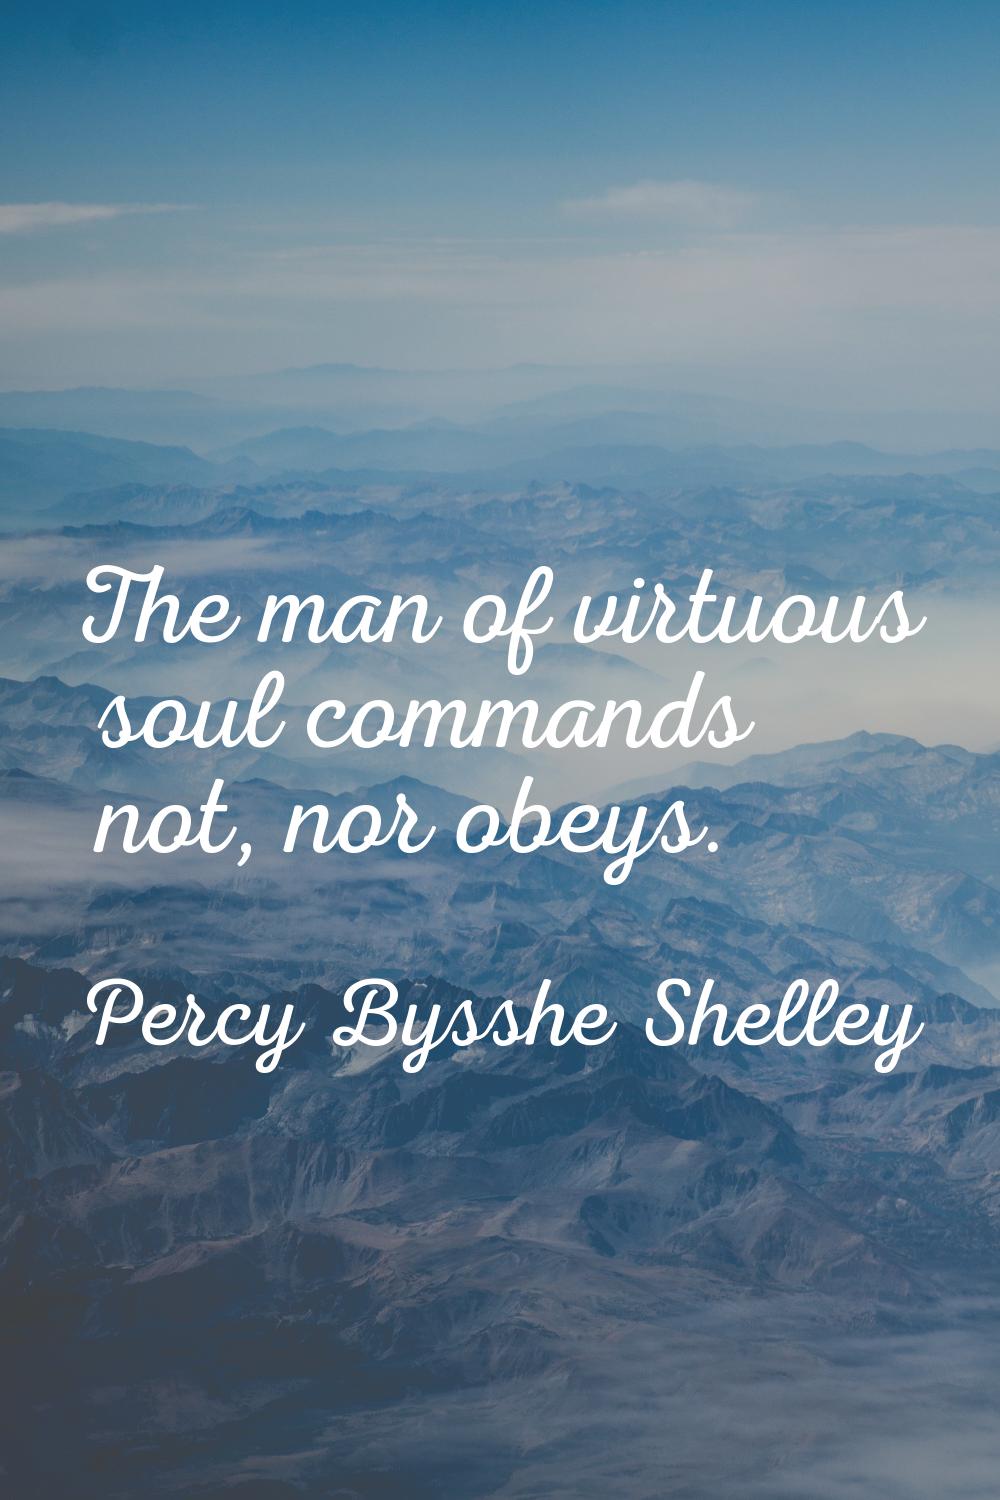 The man of virtuous soul commands not, nor obeys.